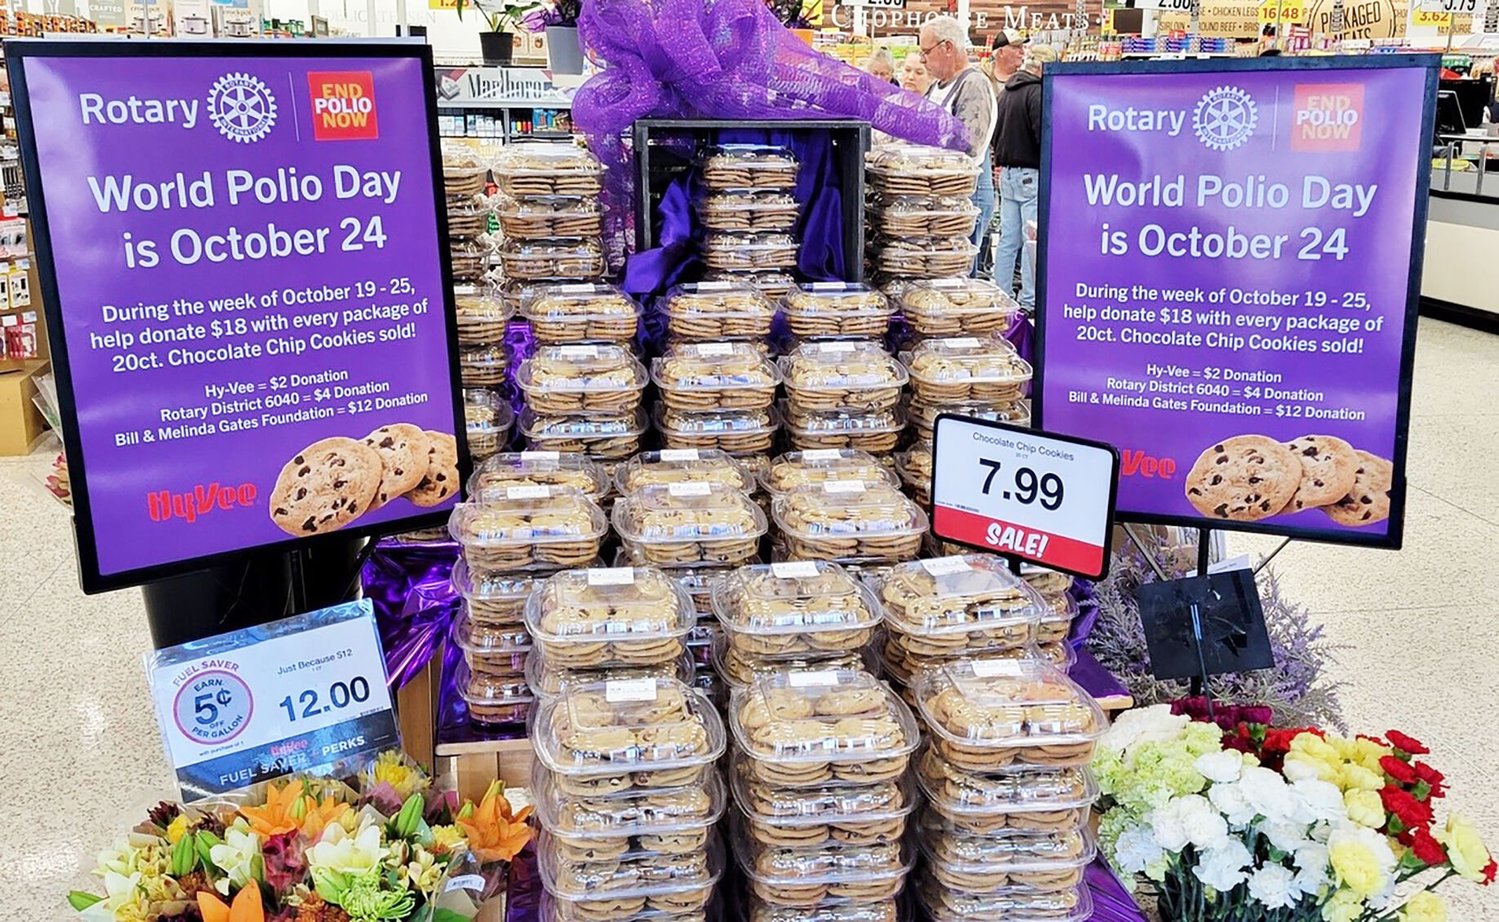 The Kirksville Hy-Vee store, in cooperation with the Rotary Club of Kirksville, will sell chocolate chip cookies for polio eradication during the week of Oct. 19-25. For every package of 20 cookies sold for $7.99, $18 will be donated to the cause. Hy-Vee will donate $2; Rotary District 6040, $4; and the Bill and Melinda Gates Foundation, $12.